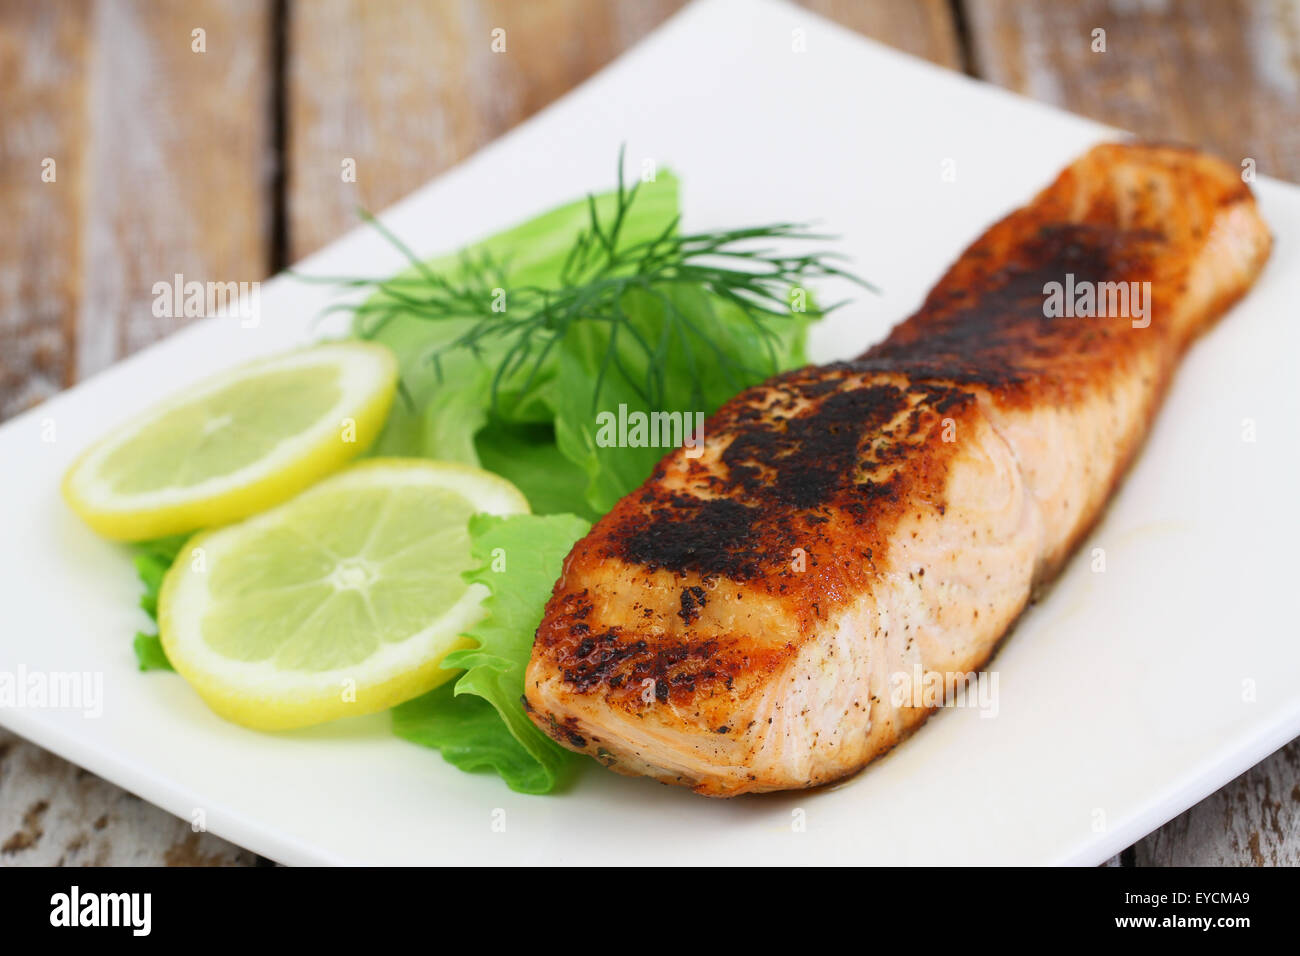 Grilled salmon with side salad and lemon, closeup Stock Photo